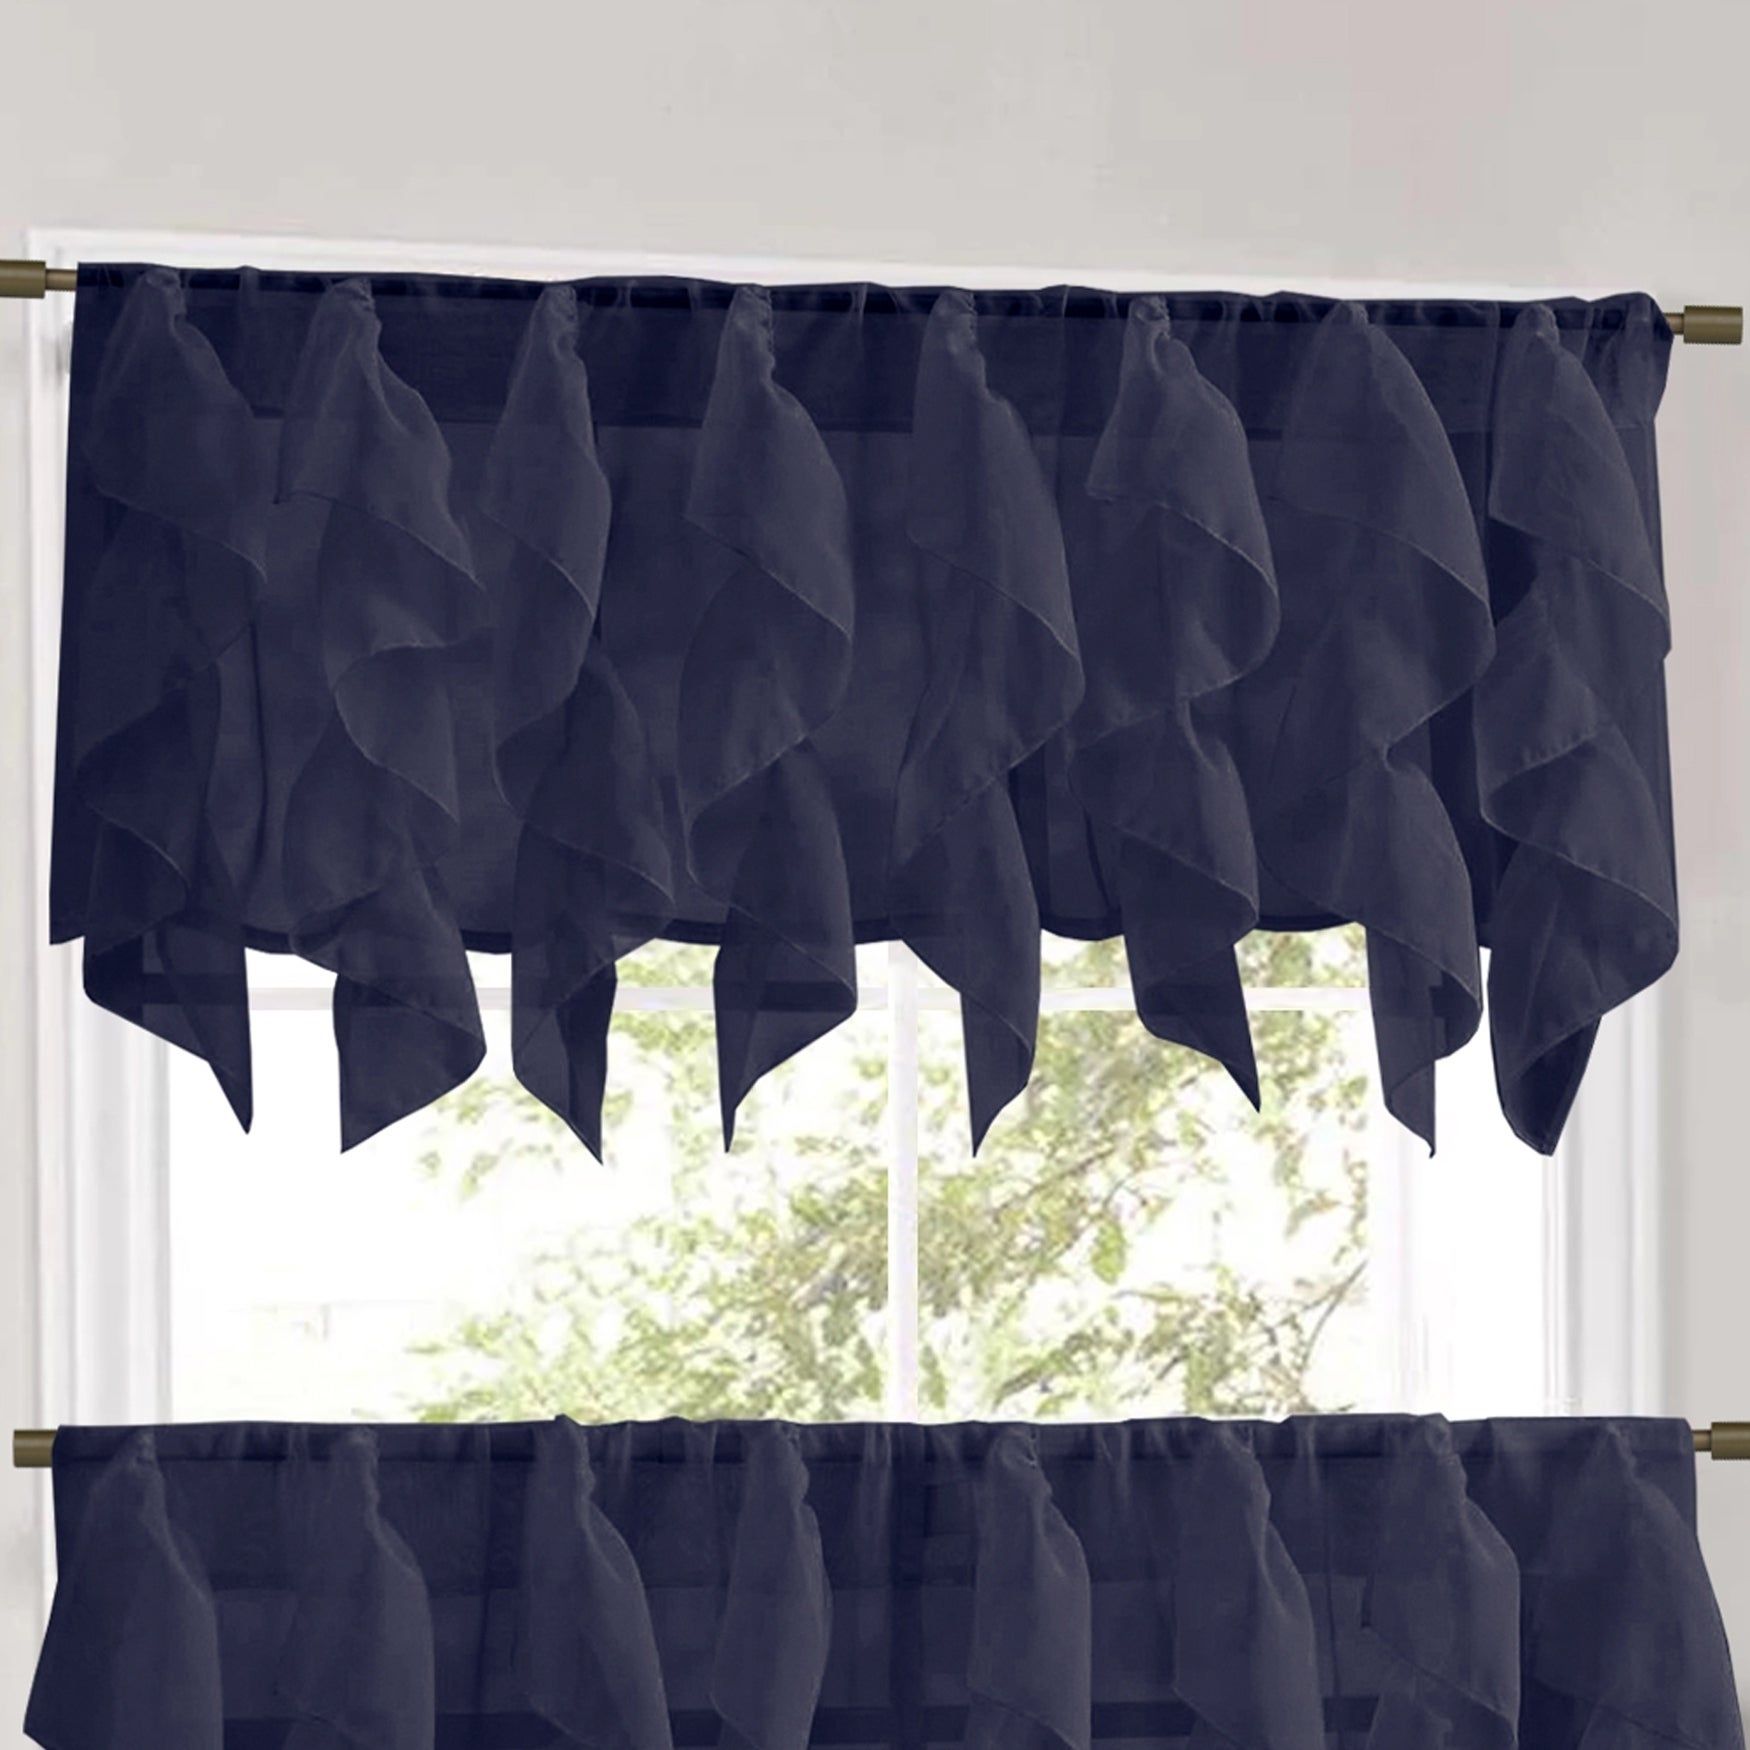 Sweet Home Collection Navy Vertical Ruffled Waterfall Valance And Curtain  Tiers Pertaining To Navy Vertical Ruffled Waterfall Valance And Curtain Tiers (View 2 of 20)